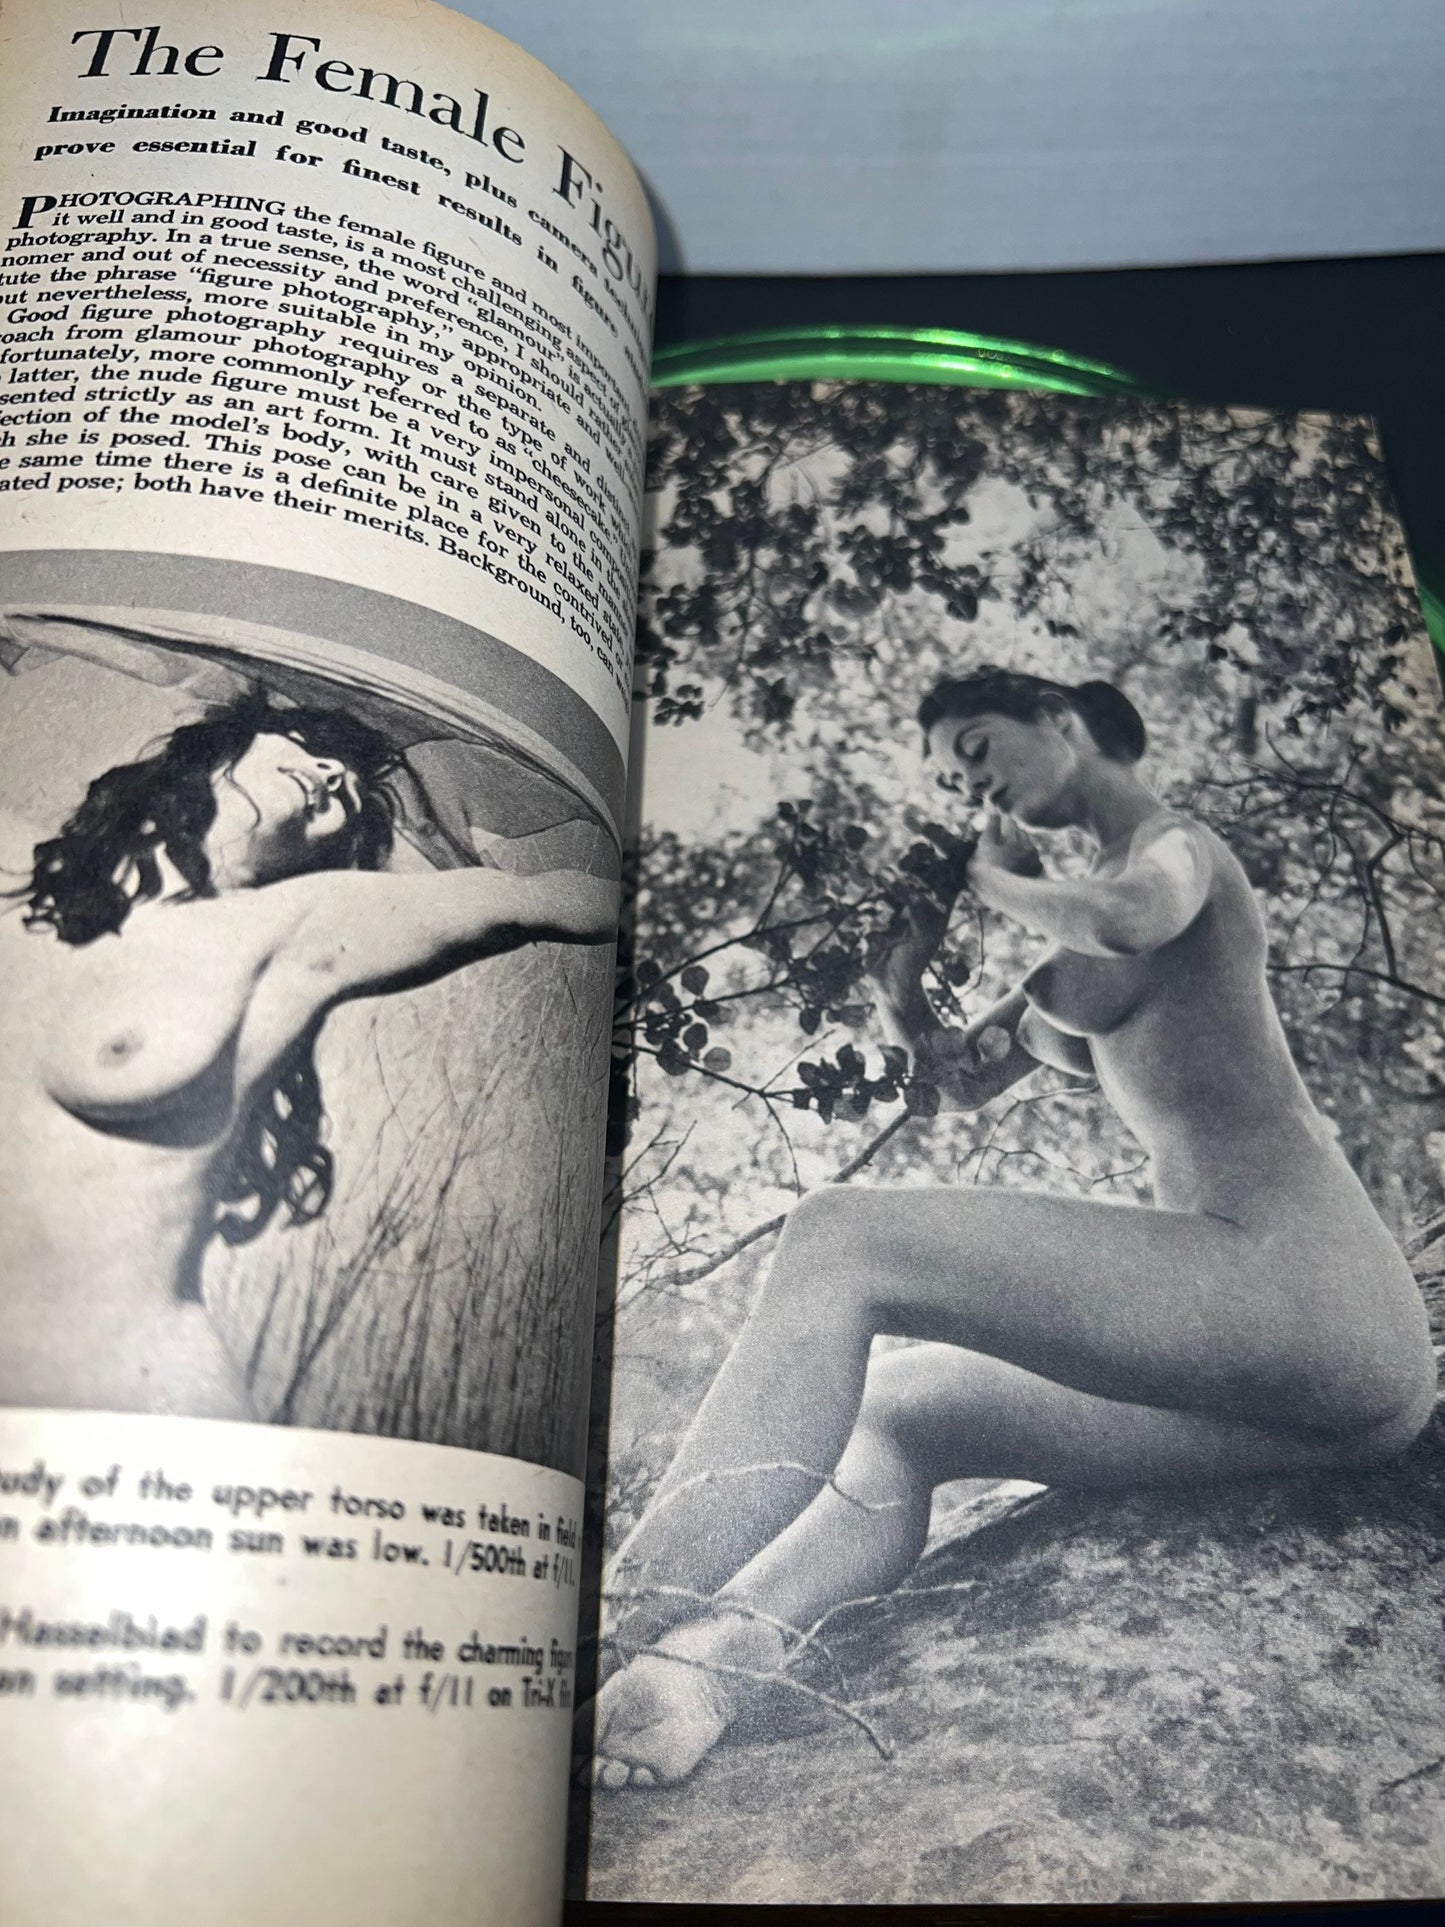 Vintage the glamour camera of Russ Meyer 1958 nudes pin up girls photography